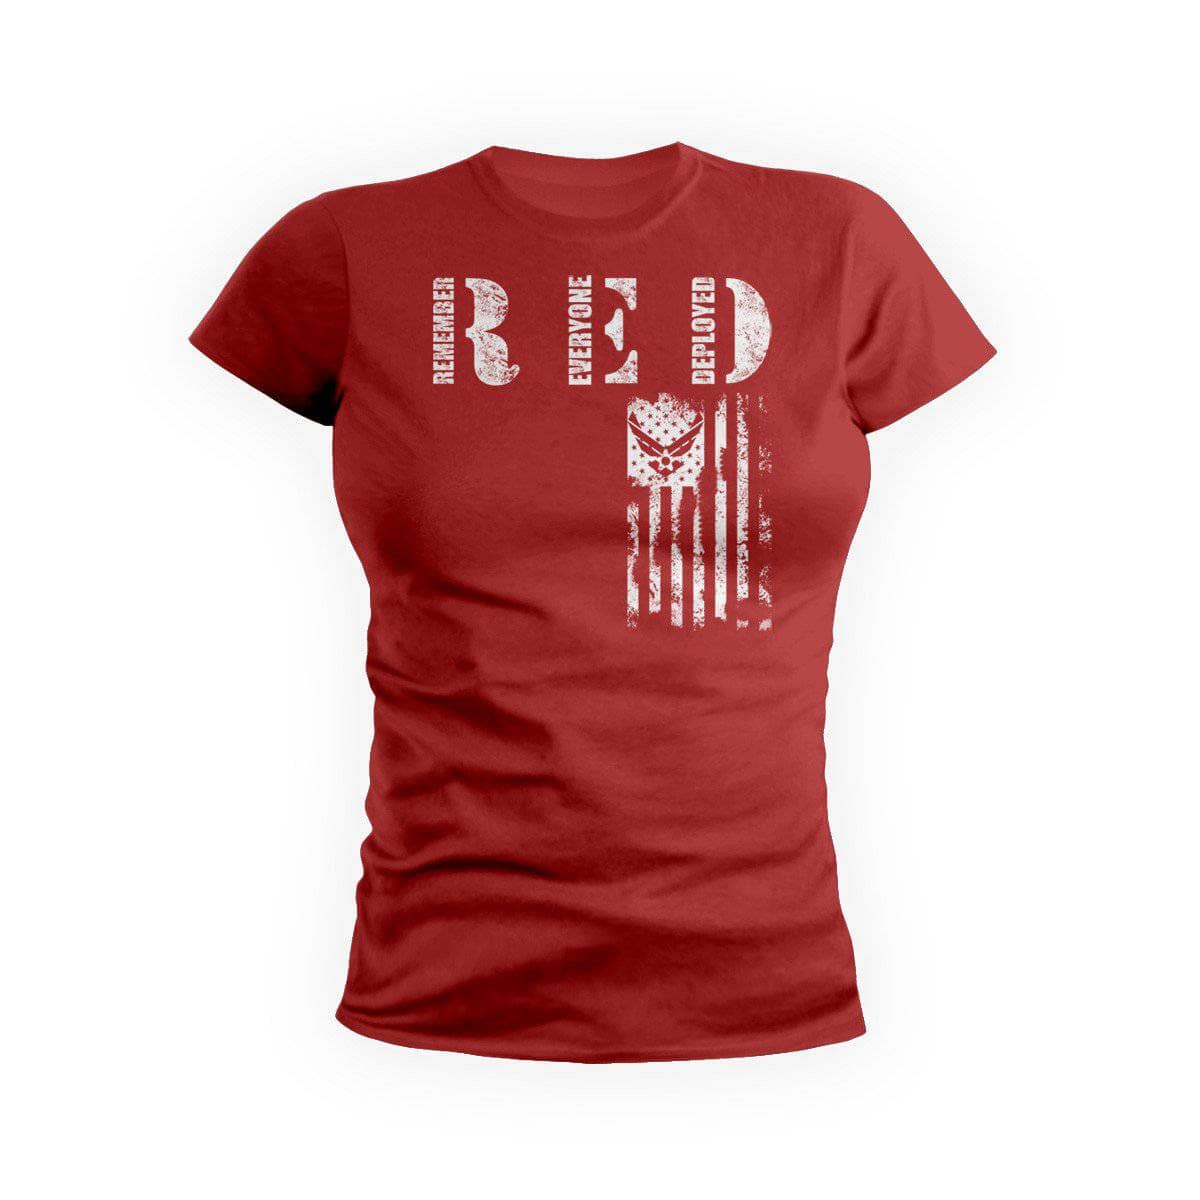 red friday military shirts